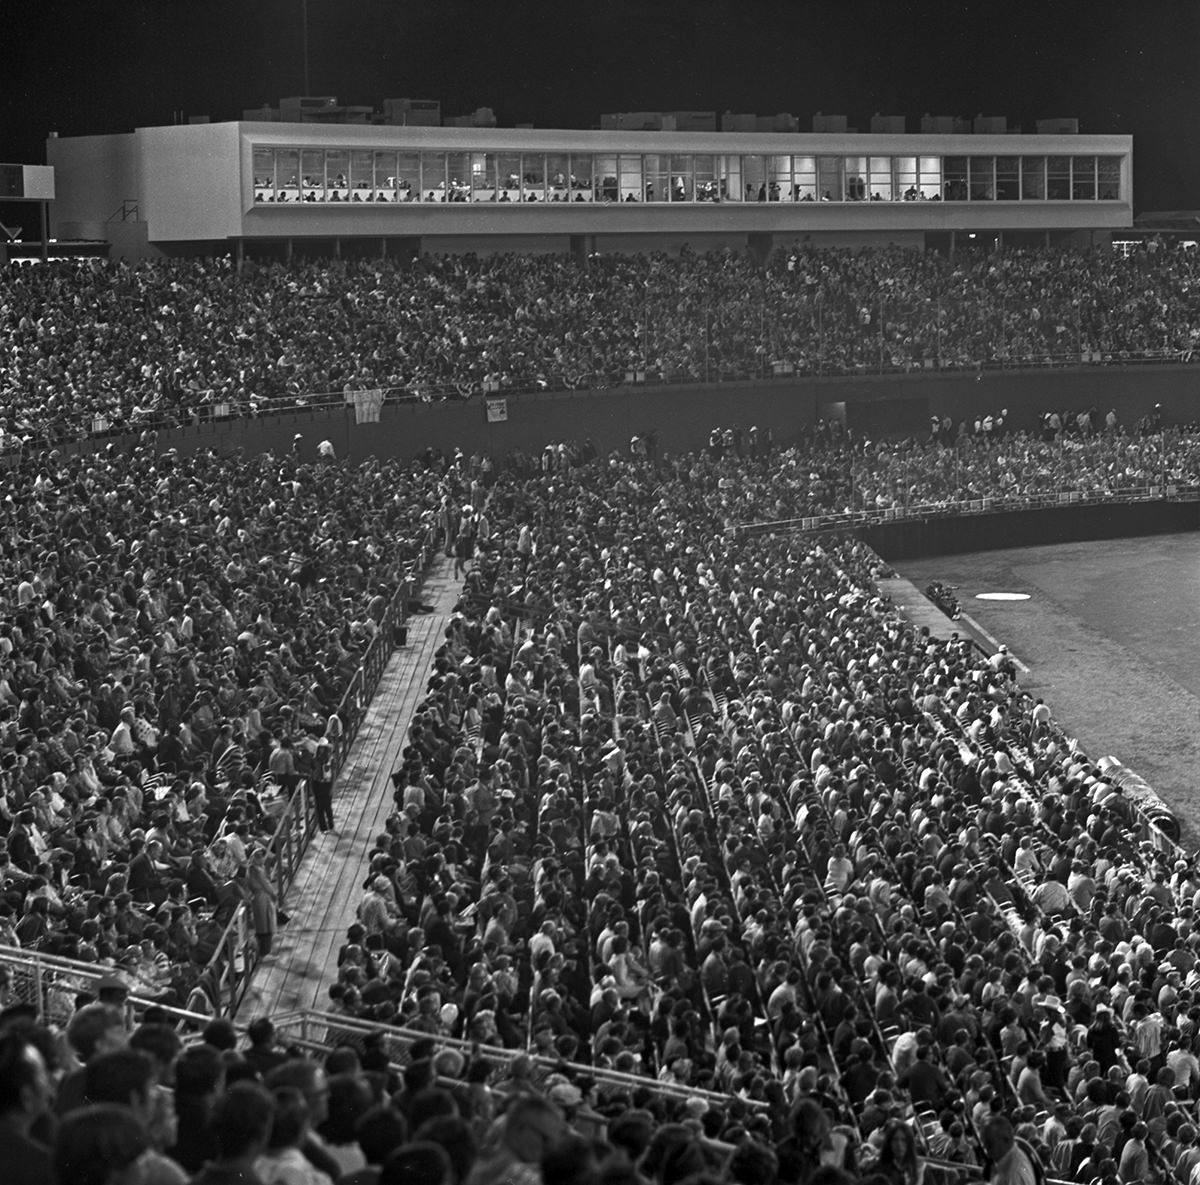 View of the crowd at Arlington Stadium for the Texas Rangers baseball team's first home game in Arlington, 1972